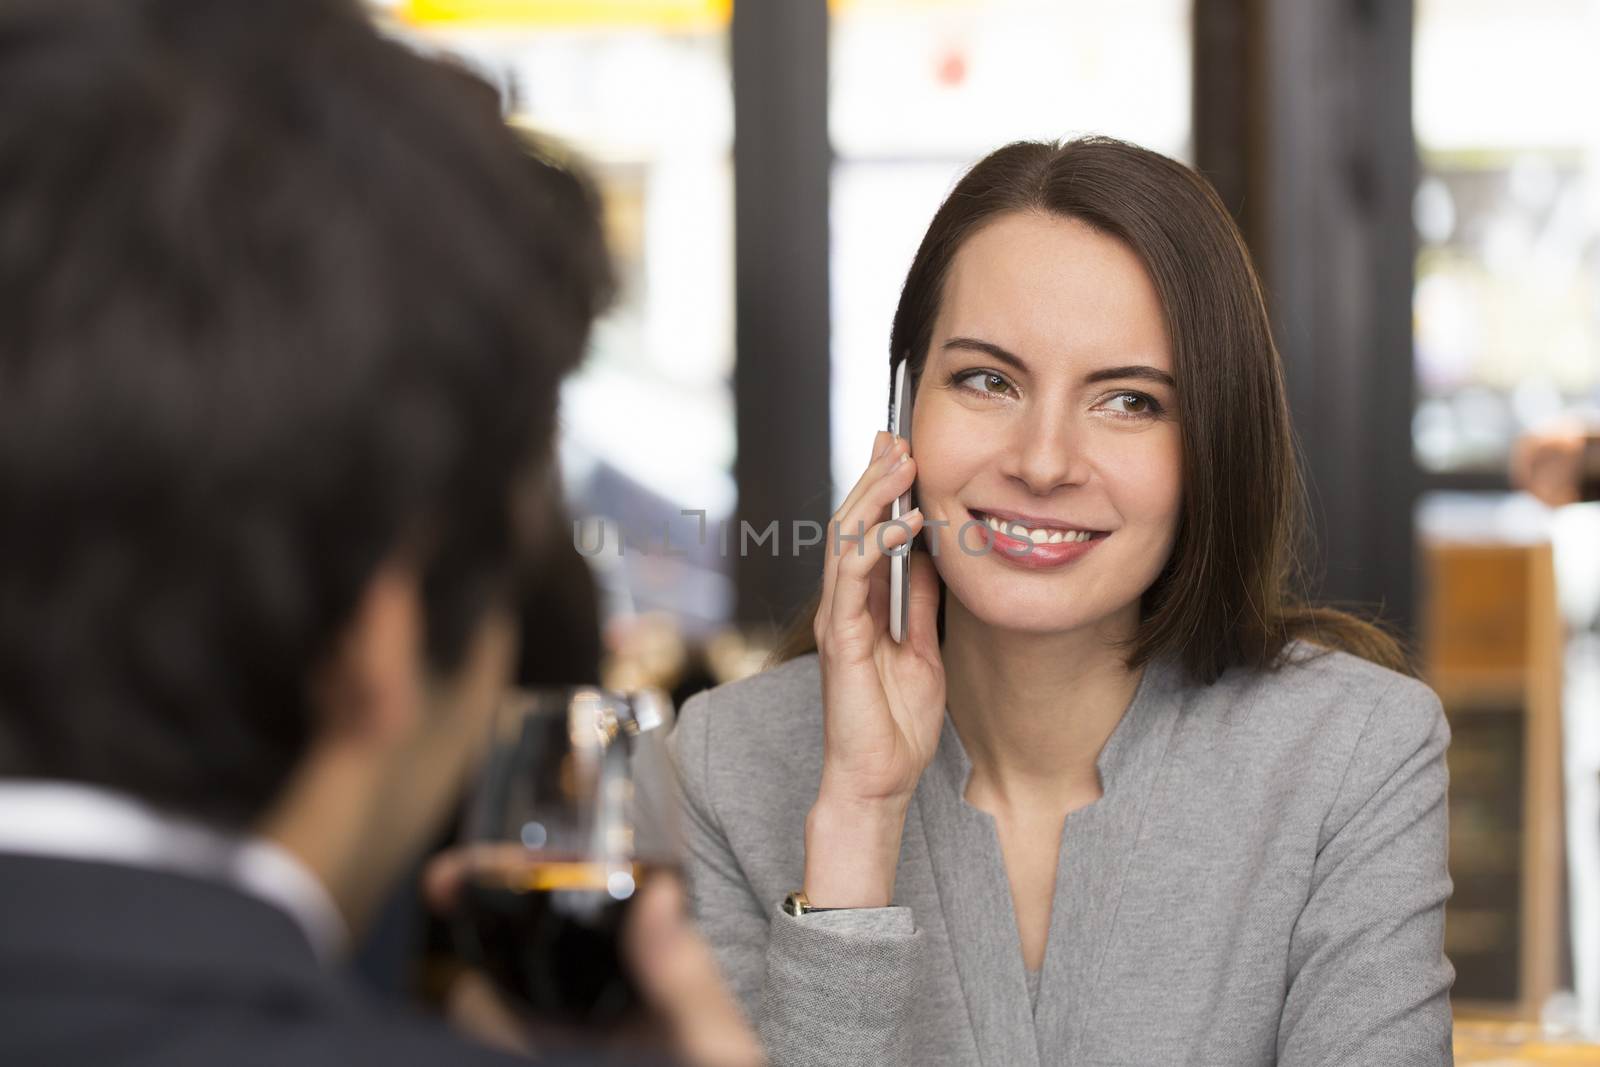 Young couple in restaurant breakfasted, woman is on the phone by LDProd